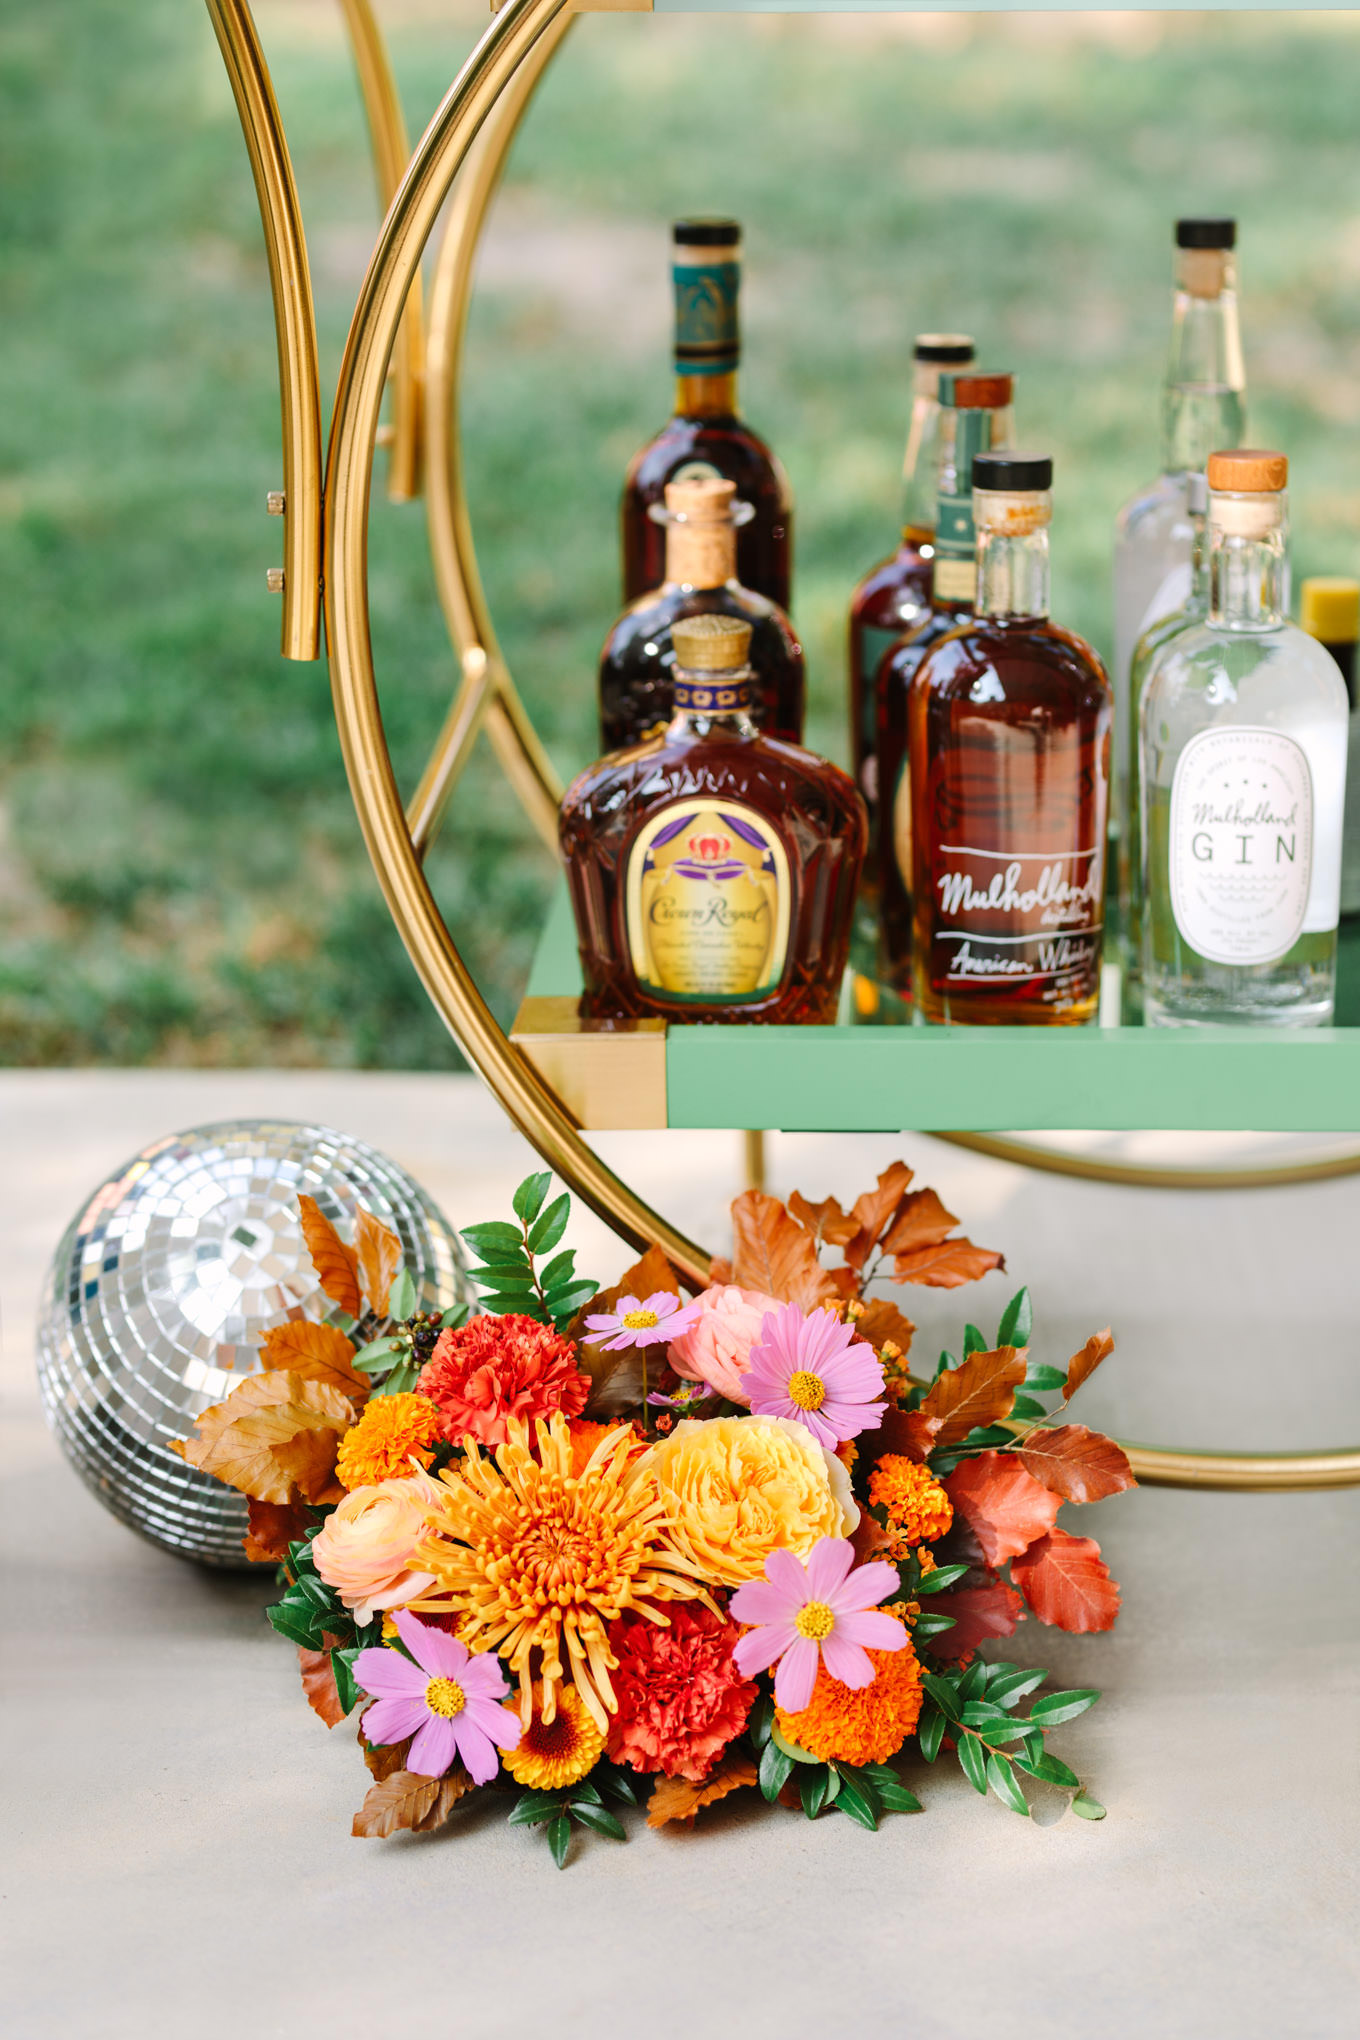 Unique, vintage wedding cart with vibrant florals | Vibrant backyard micro wedding featured on Green Wedding Shoes | Colorful LA wedding photography | #losangeleswedding #backyardwedding #microwedding #laweddingphotographer Source: Mary Costa Photography | Los Angeles